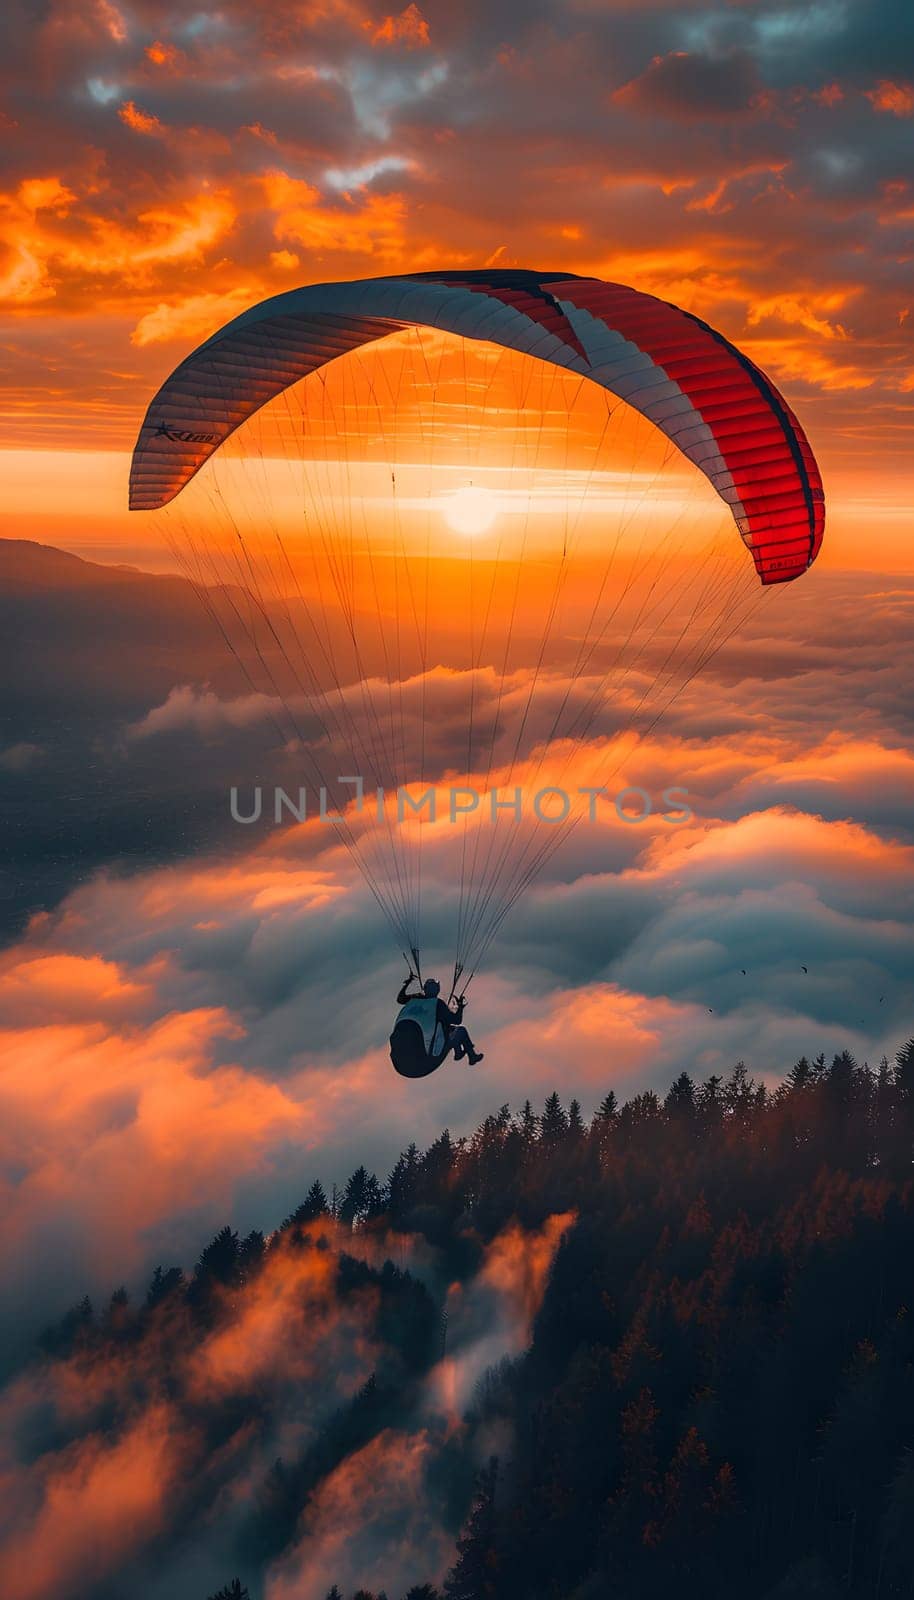 A person is parasailing at sunset over a mountain, surrounded by orange hues and a peaceful atmosphere in the natural landscape